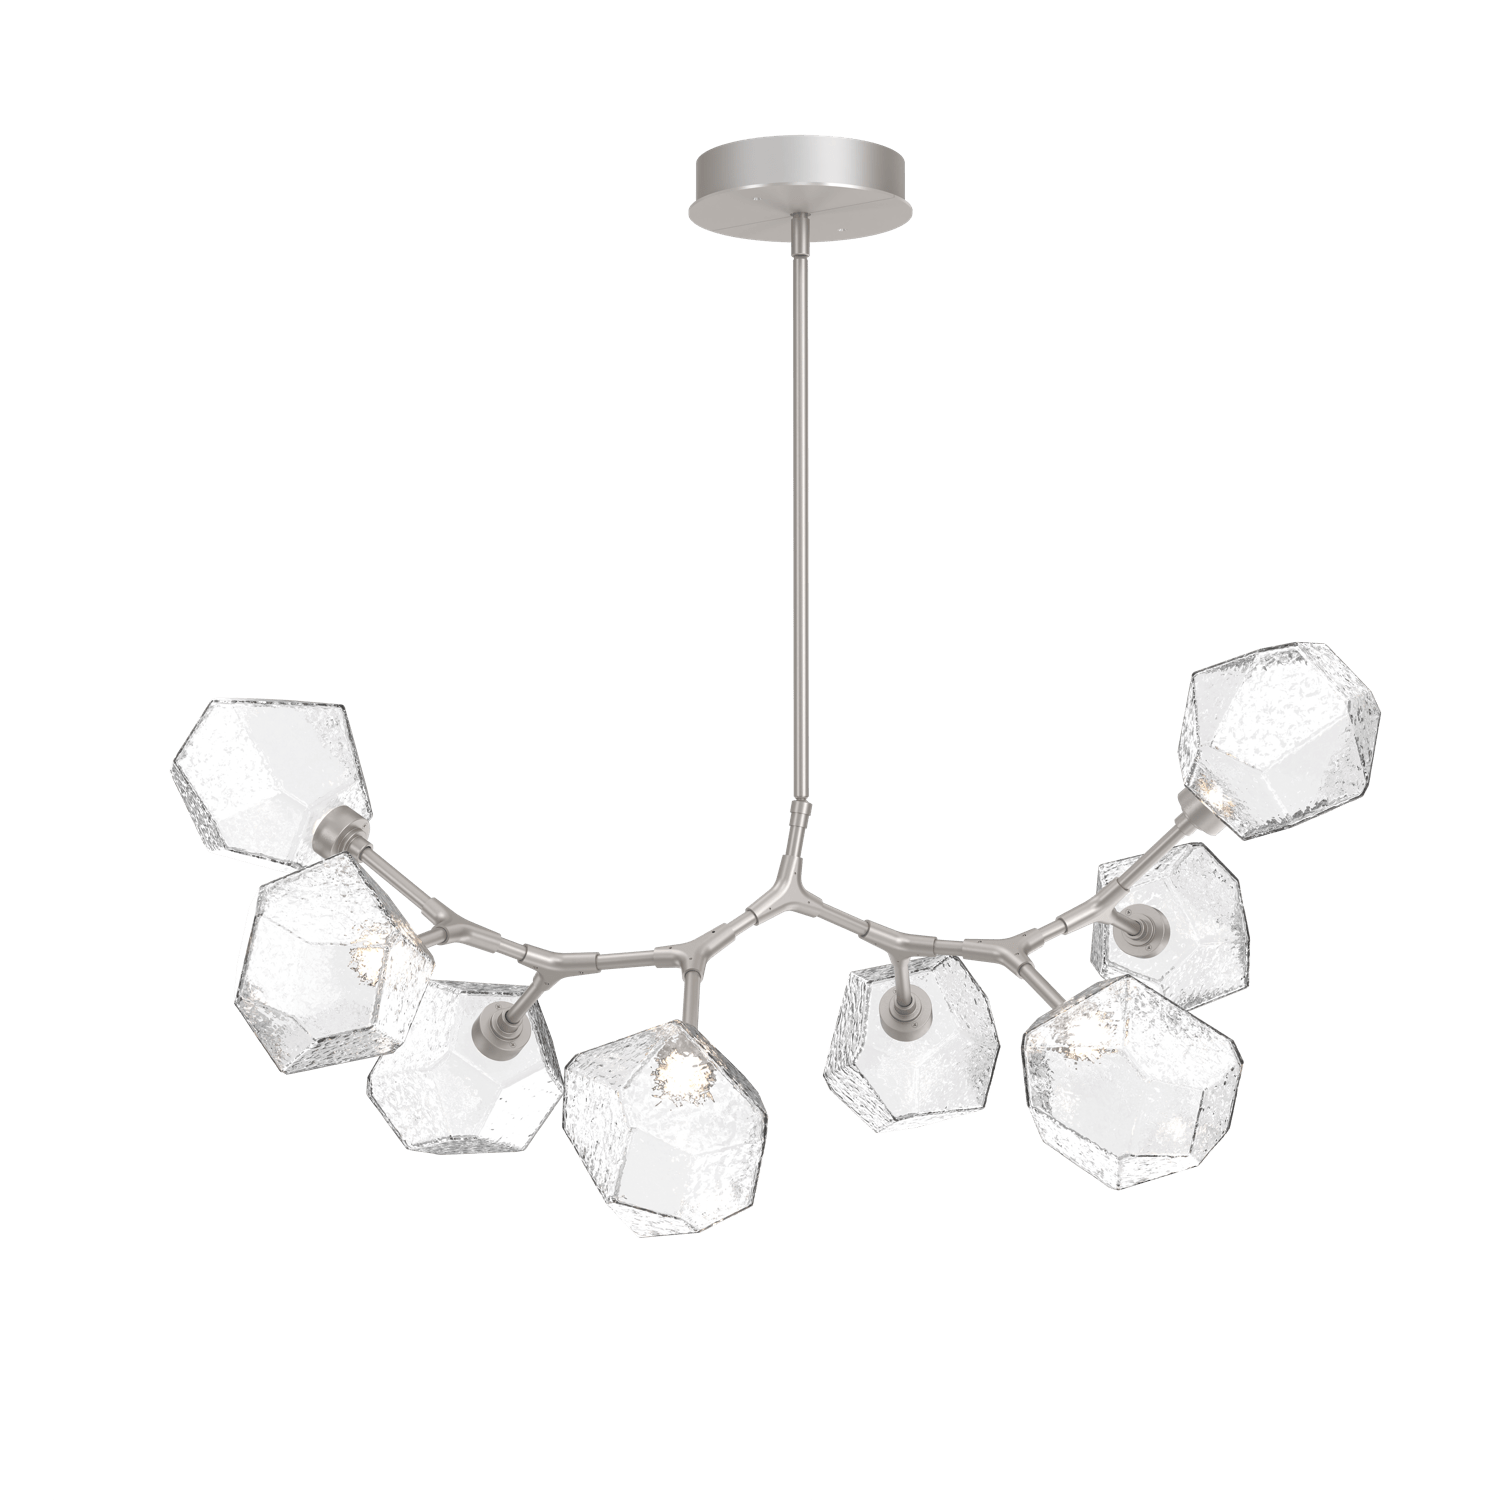 PLB0039-BB-BS-C-Hammerton-Studio-Gem-8-light-modern-branch-chandelier-with-metallic-beige-silver-finish-and-clear-blown-glass-shades-and-LED-lamping